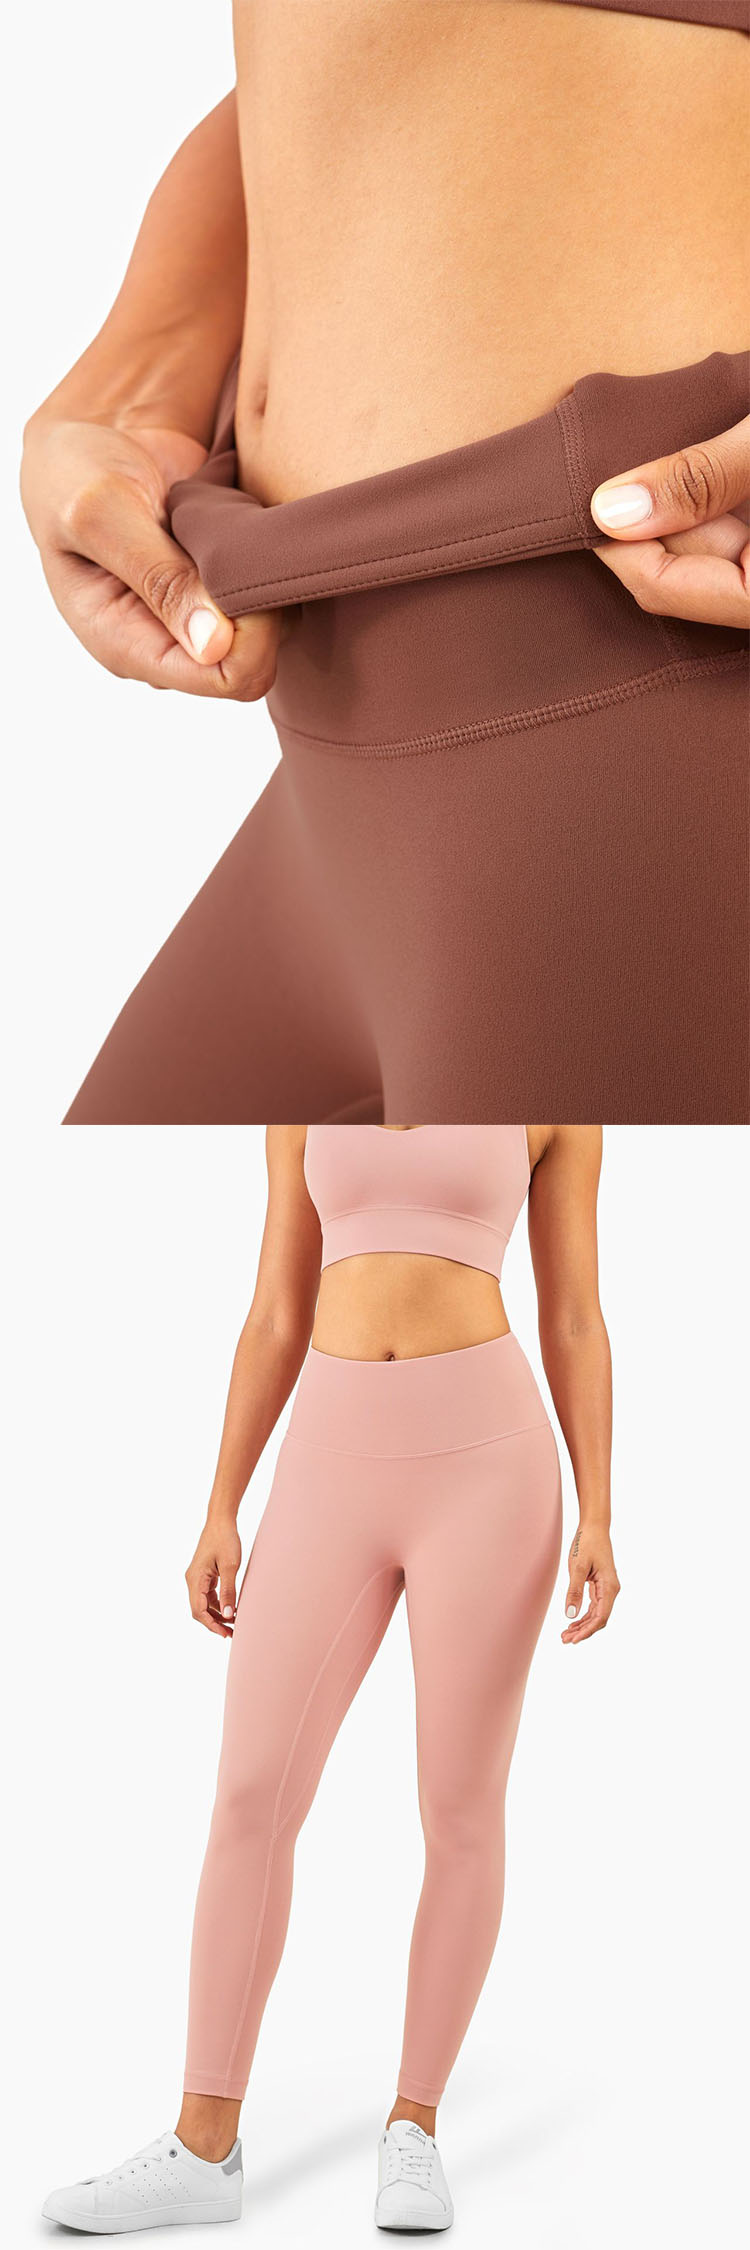 The new pressure shunt crotch, embrace the peach, guard without embarrassment, and yoga exercises are more at ease.